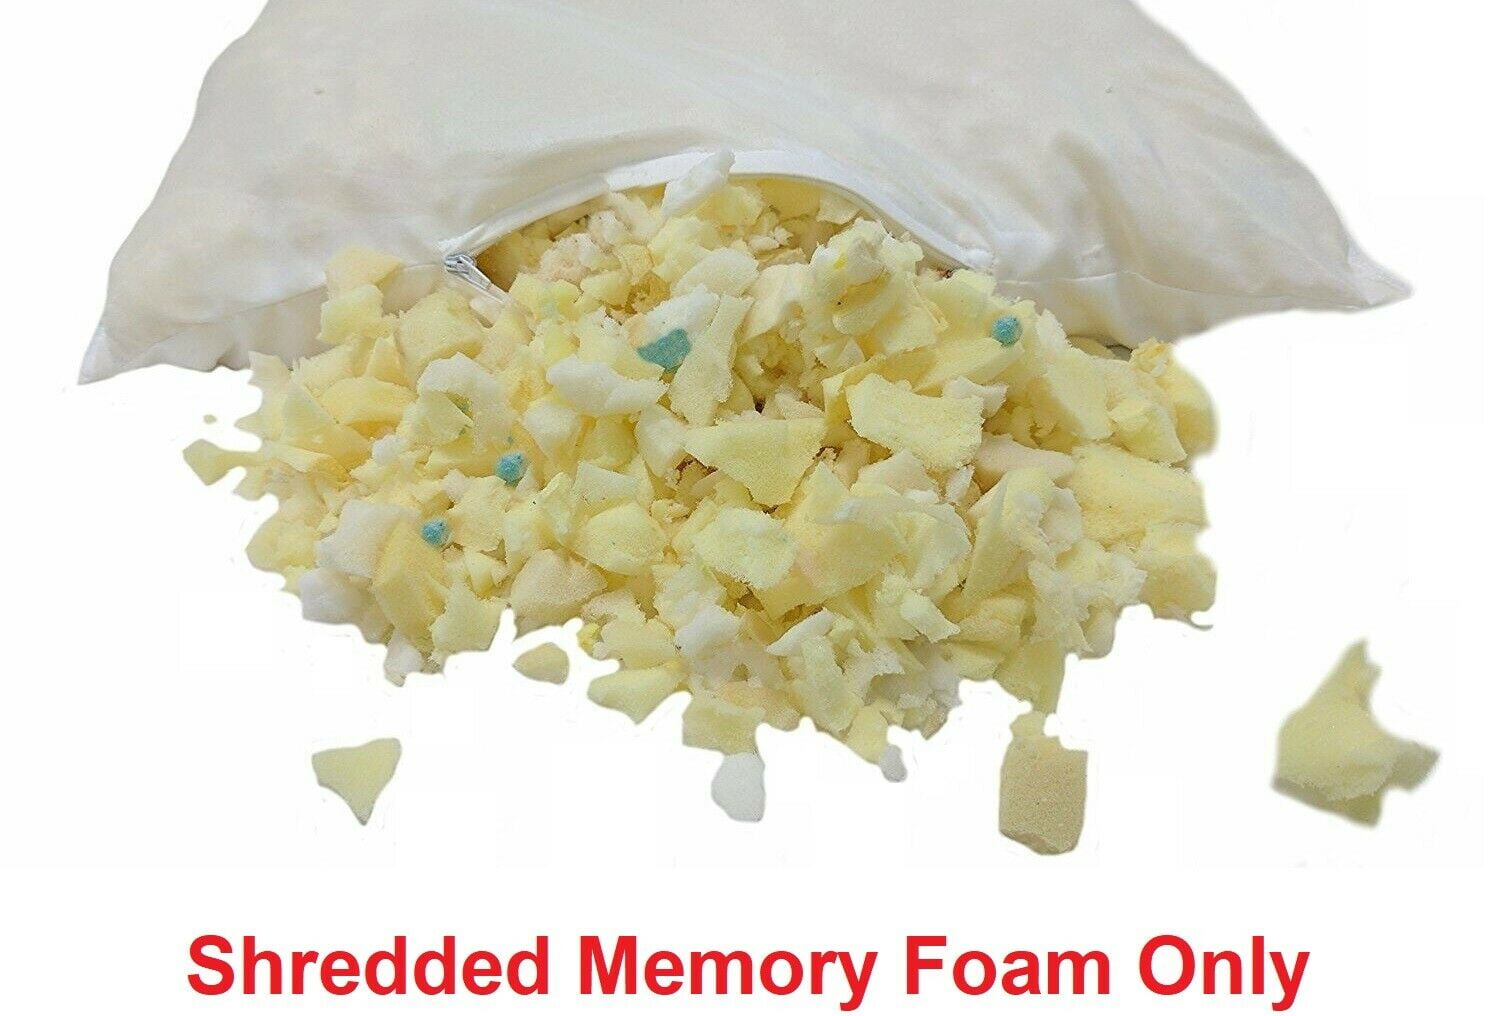 QQbed Shredded Memory Foam Fill Refill Replacement for Pillows, Bean Bag,  Chairs, Dog Pet Beds, Cushions, Stuffed Animals and Crafts 